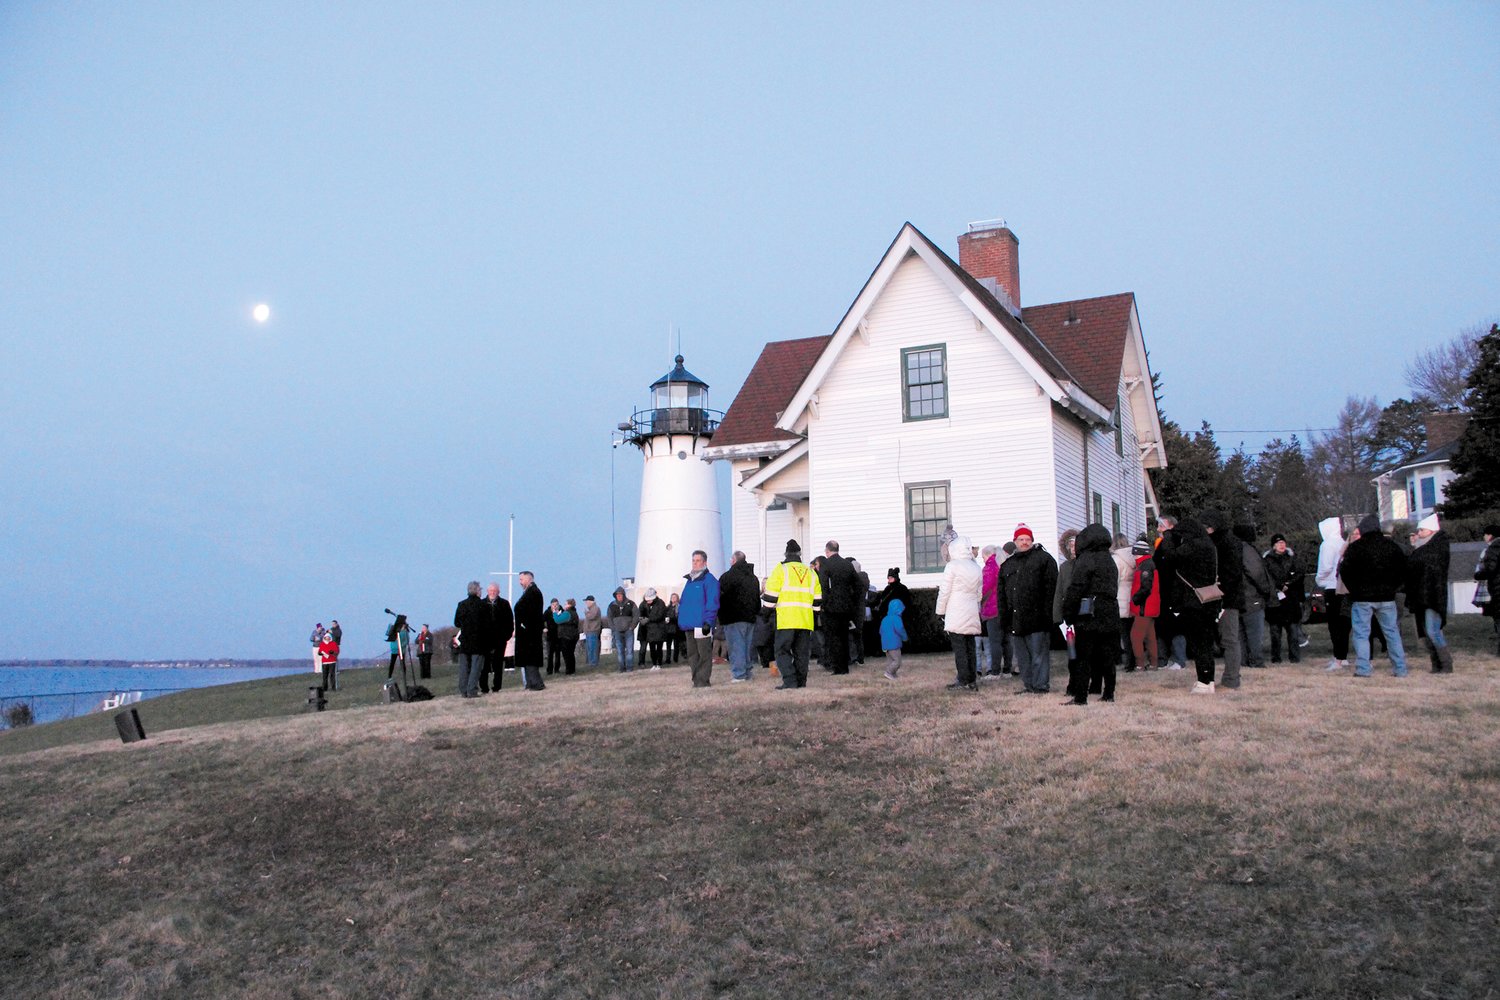 ONCE A YEAR: Easter Sunrise services have been a longtime tradition at Warwick Neck light. The service is one of the few occasions in recent times that the property is open to the public. This photo was taken this Easter as the moon was about the set and the sun rise. (Warwick Beacon photo)